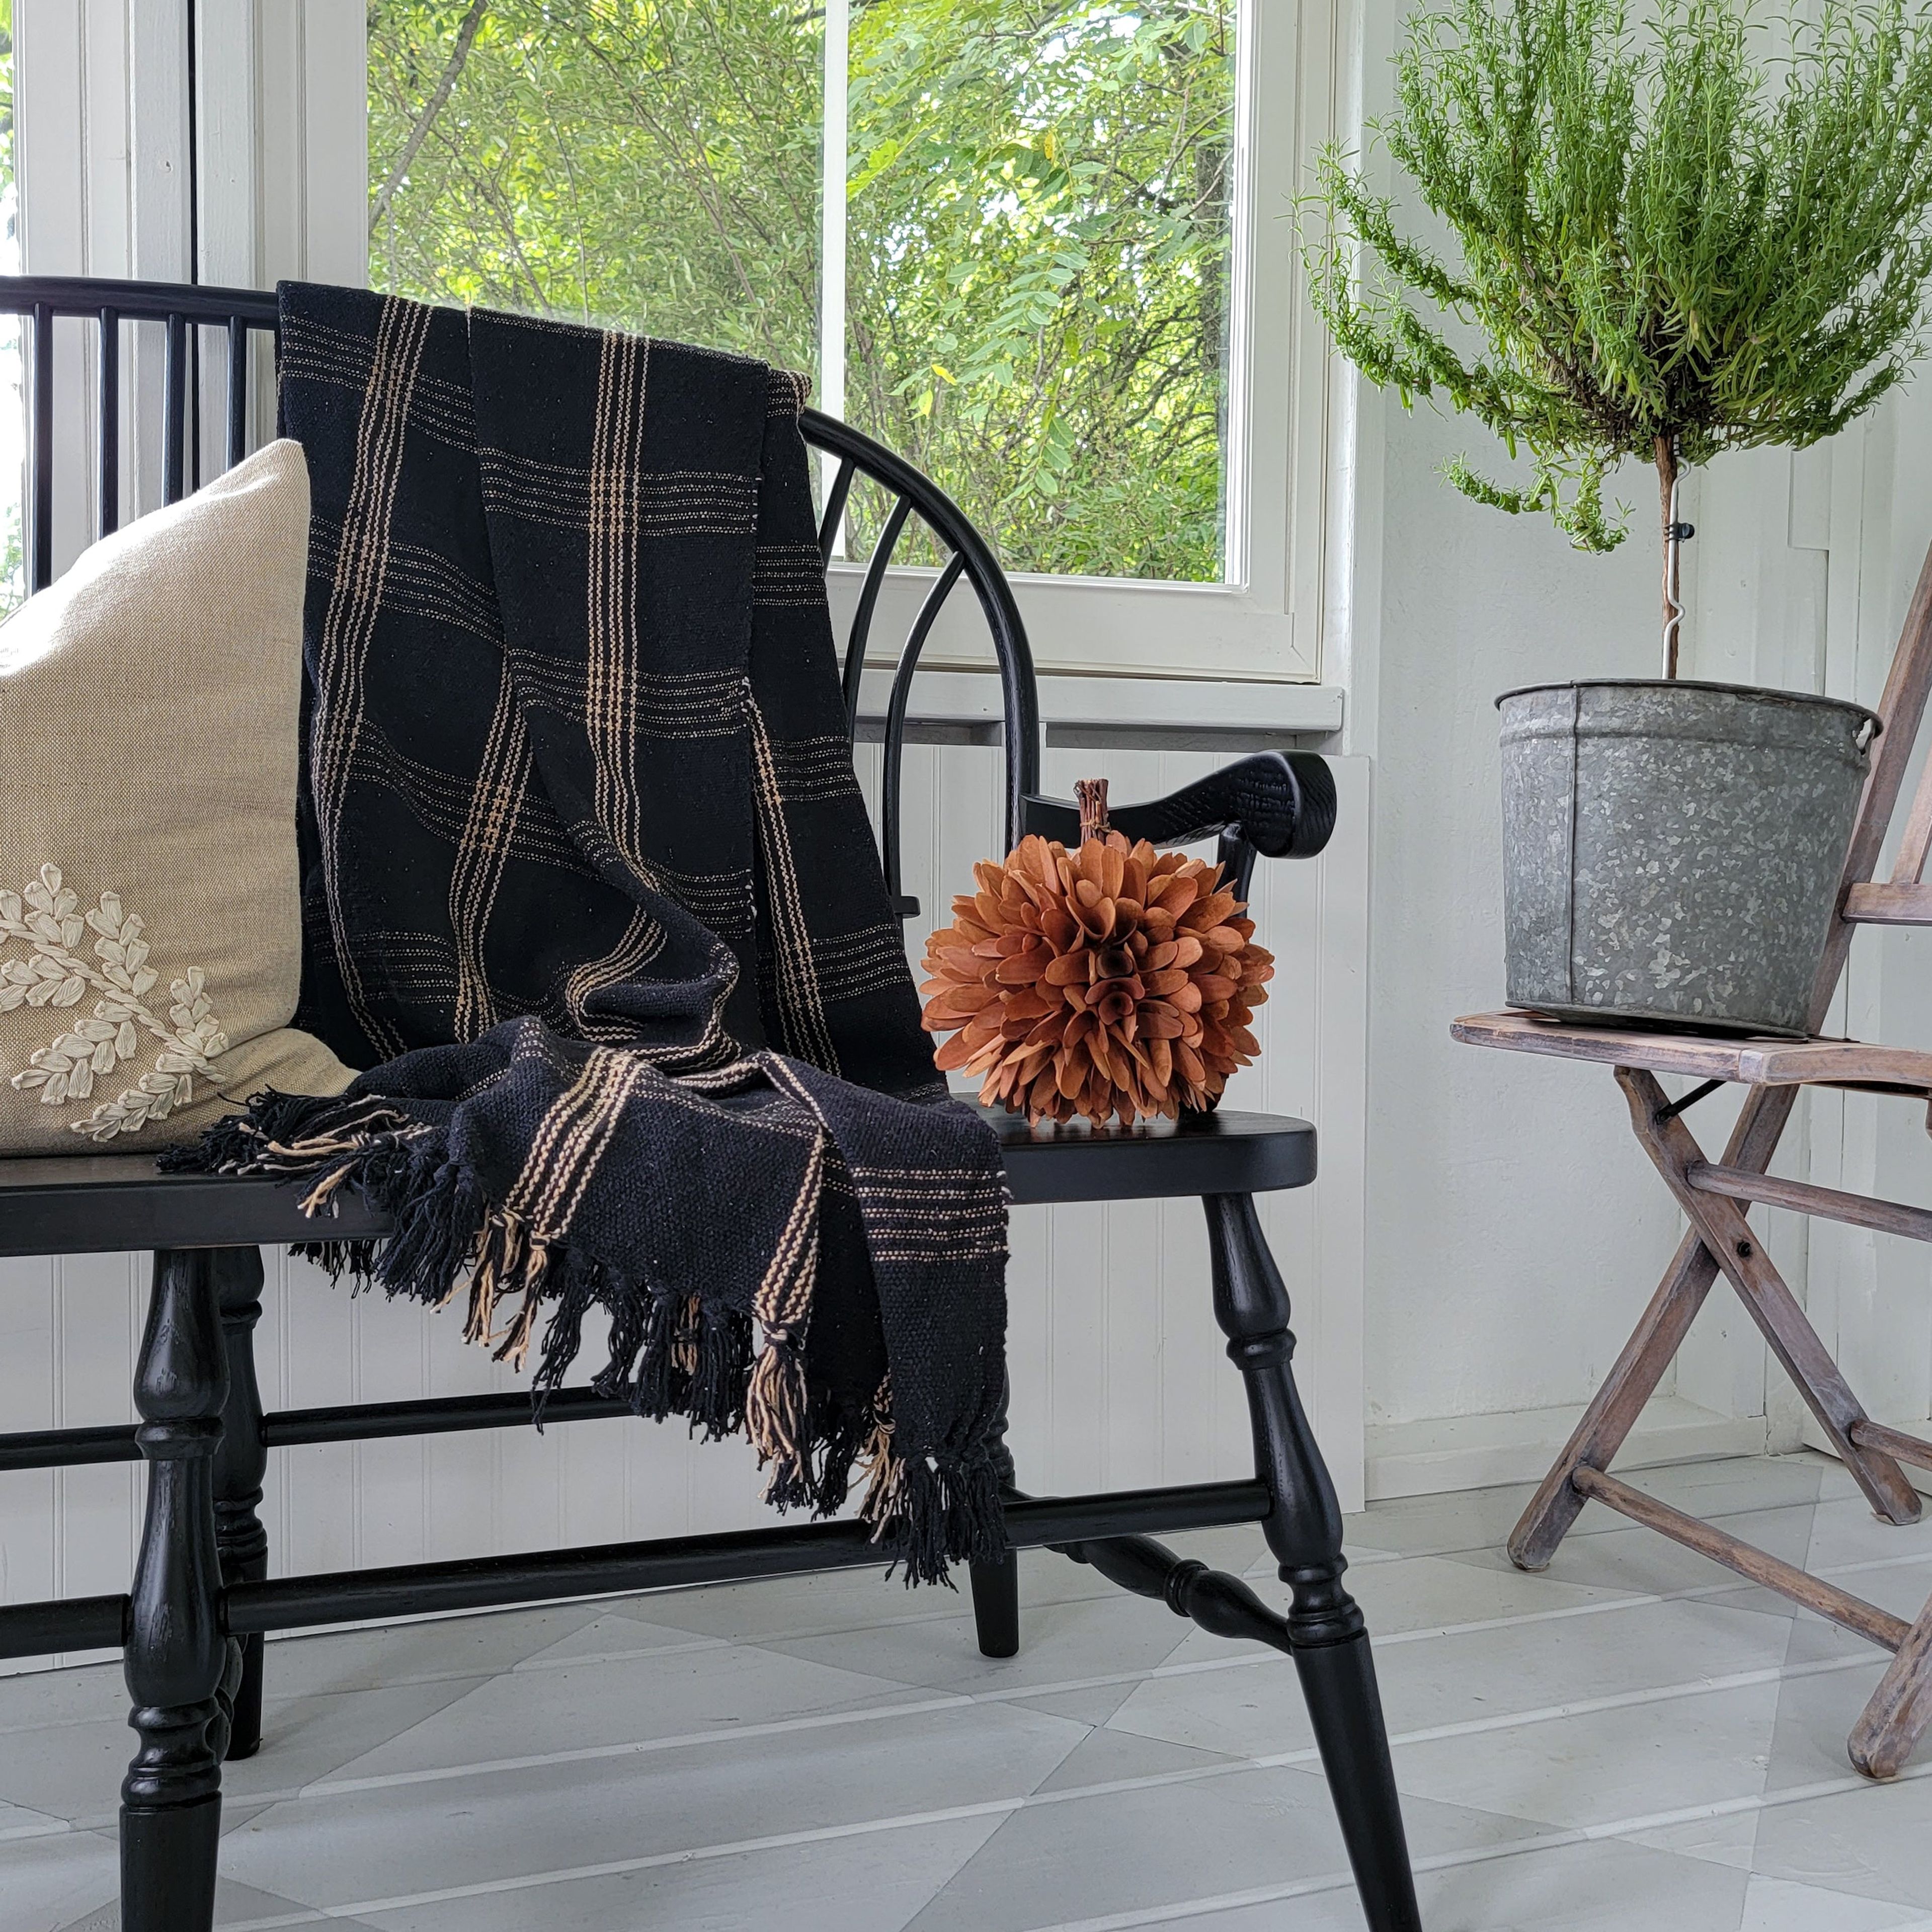 Woven Cotton Blend Throw with Fringe